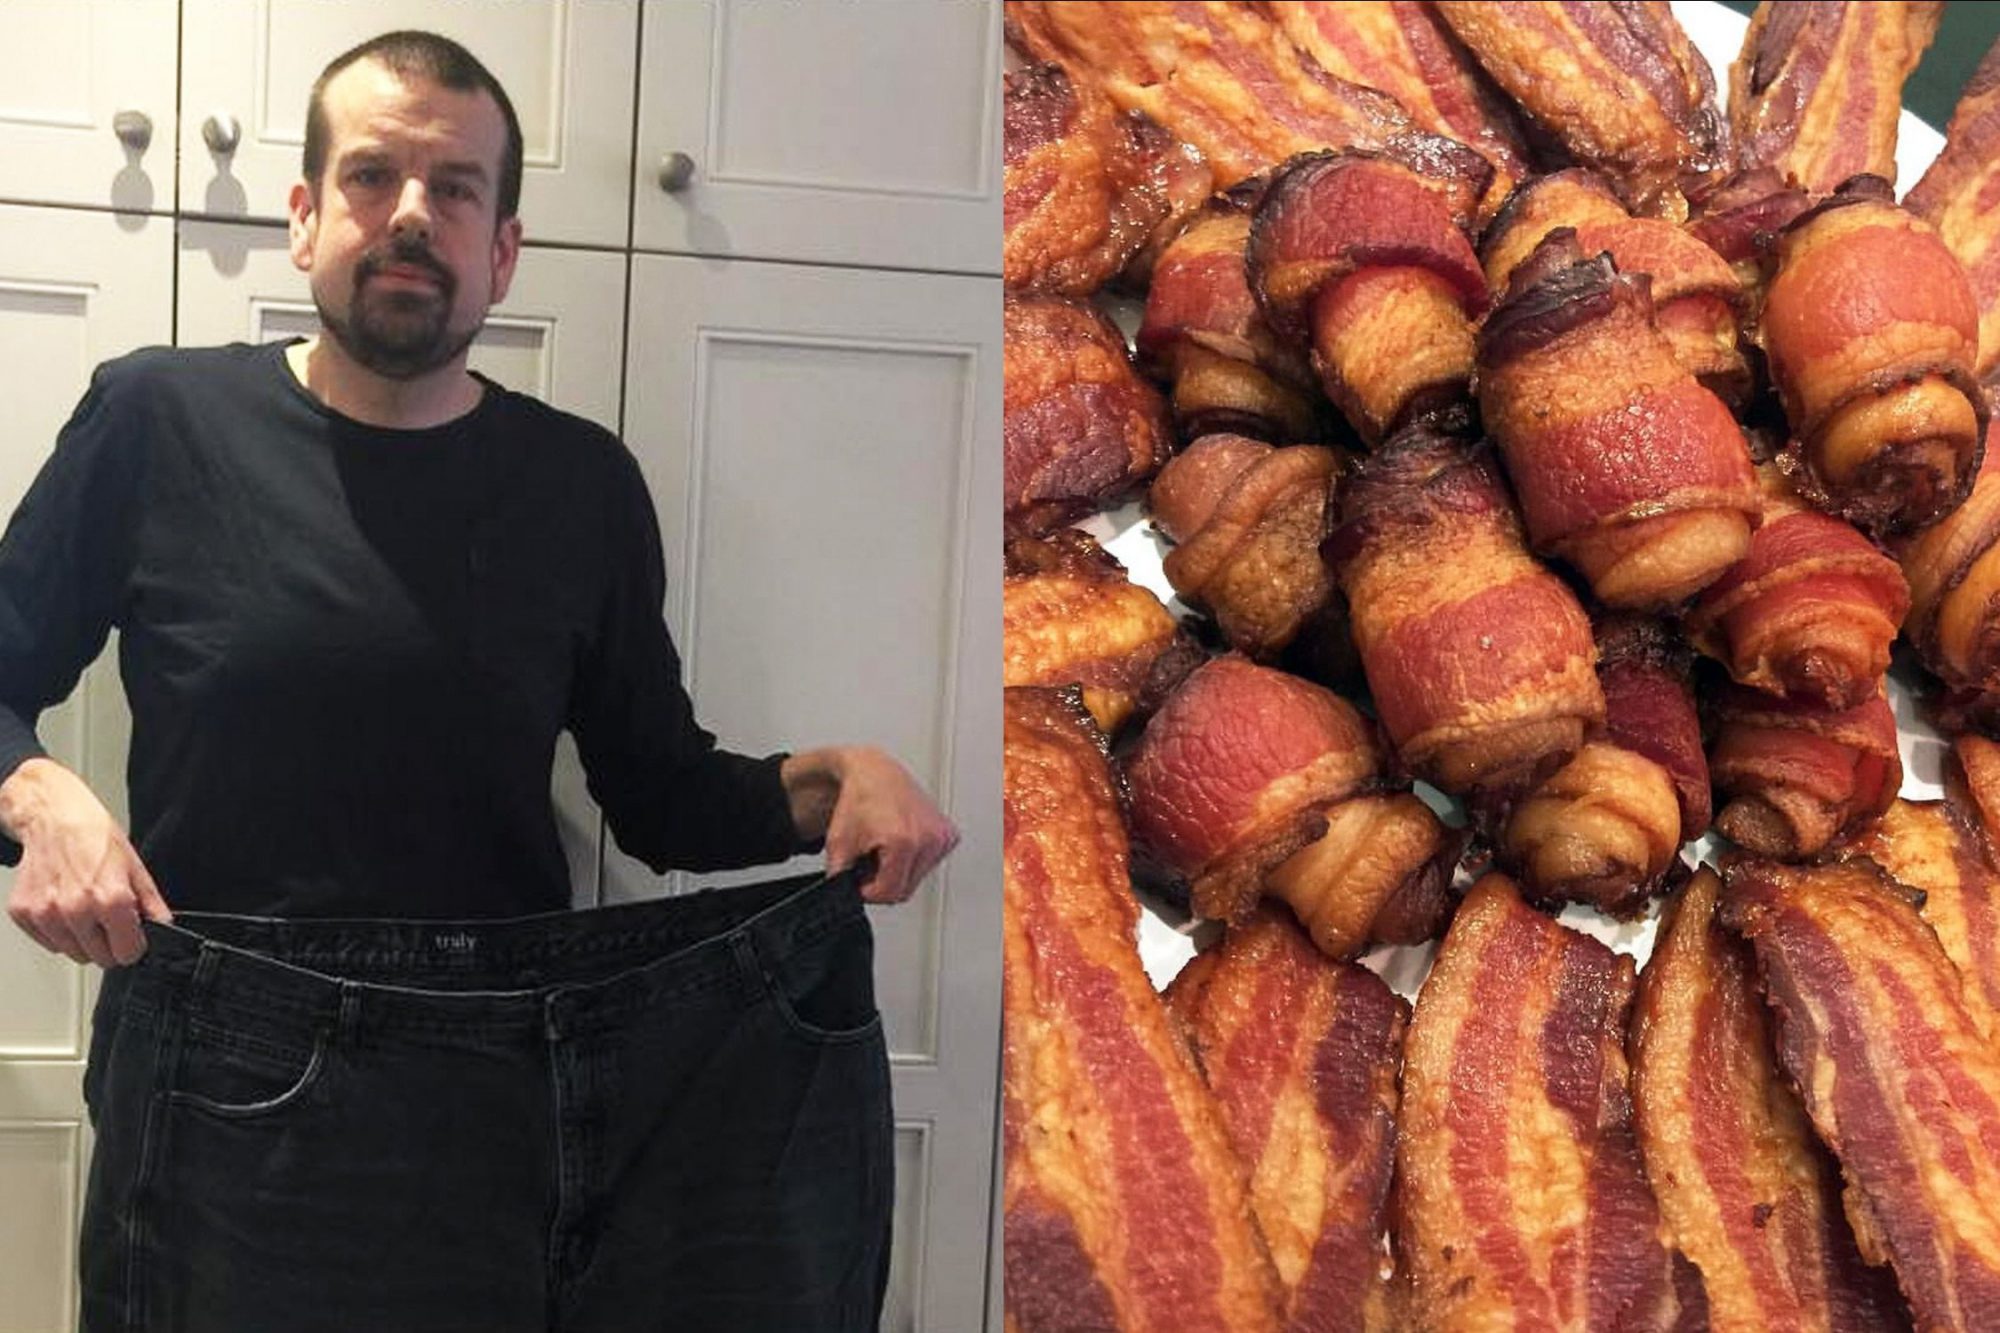 EC: This Diet Guru Lost 20 Pounds Eating Two Pounds of Bacon Per Day